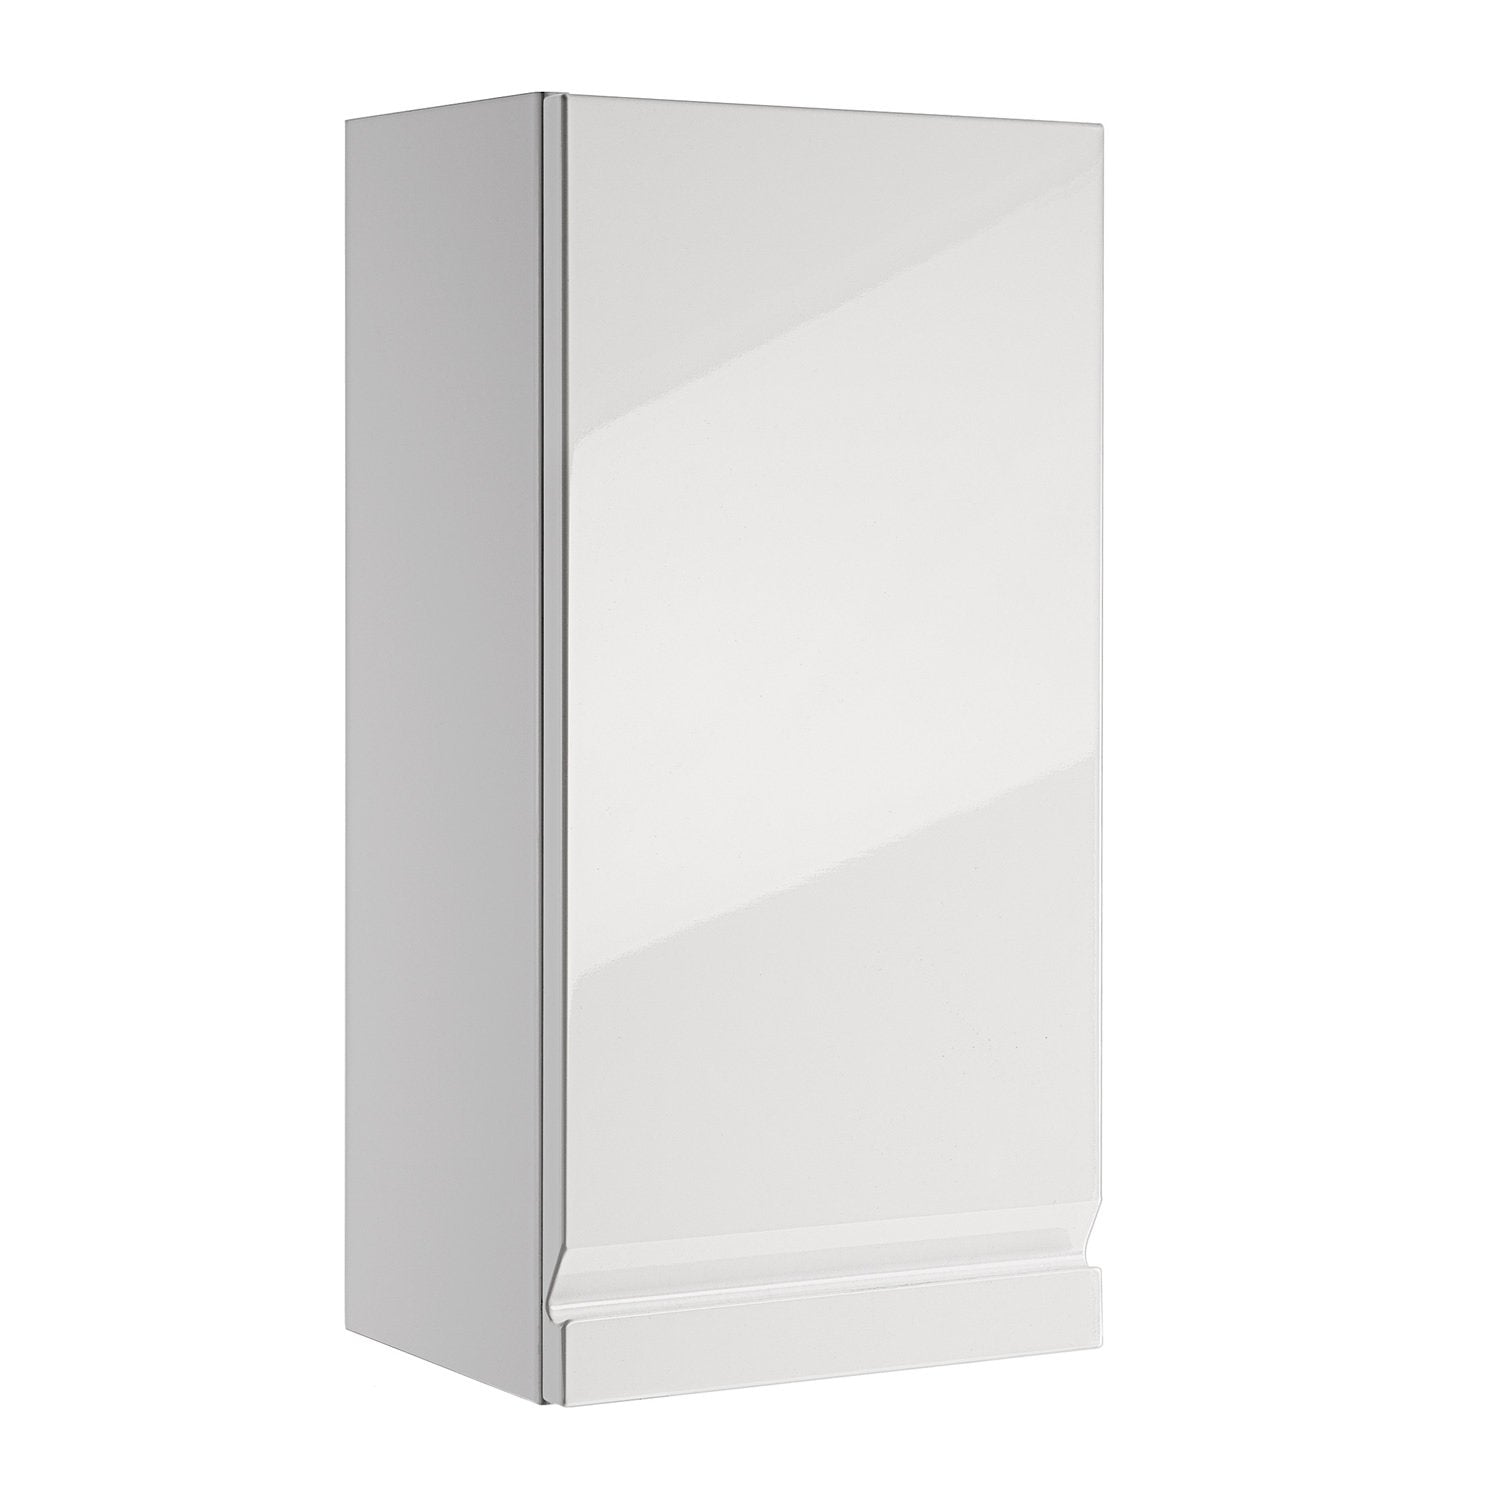 16" Small Side Cabinet, Wall Mount, 1 Door whit Soft Close and Left Opening, White, Serie Solco by VALENZUELA